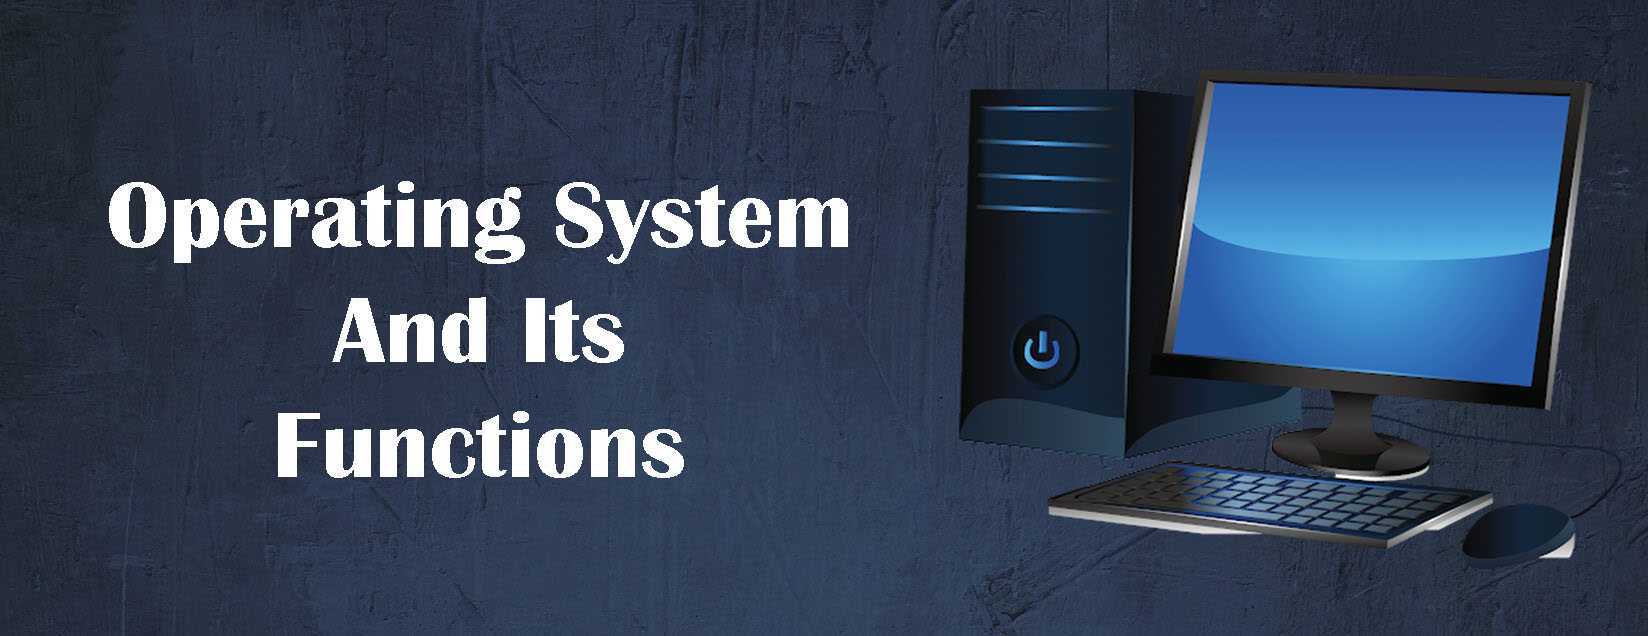 Operating System And Its Functions